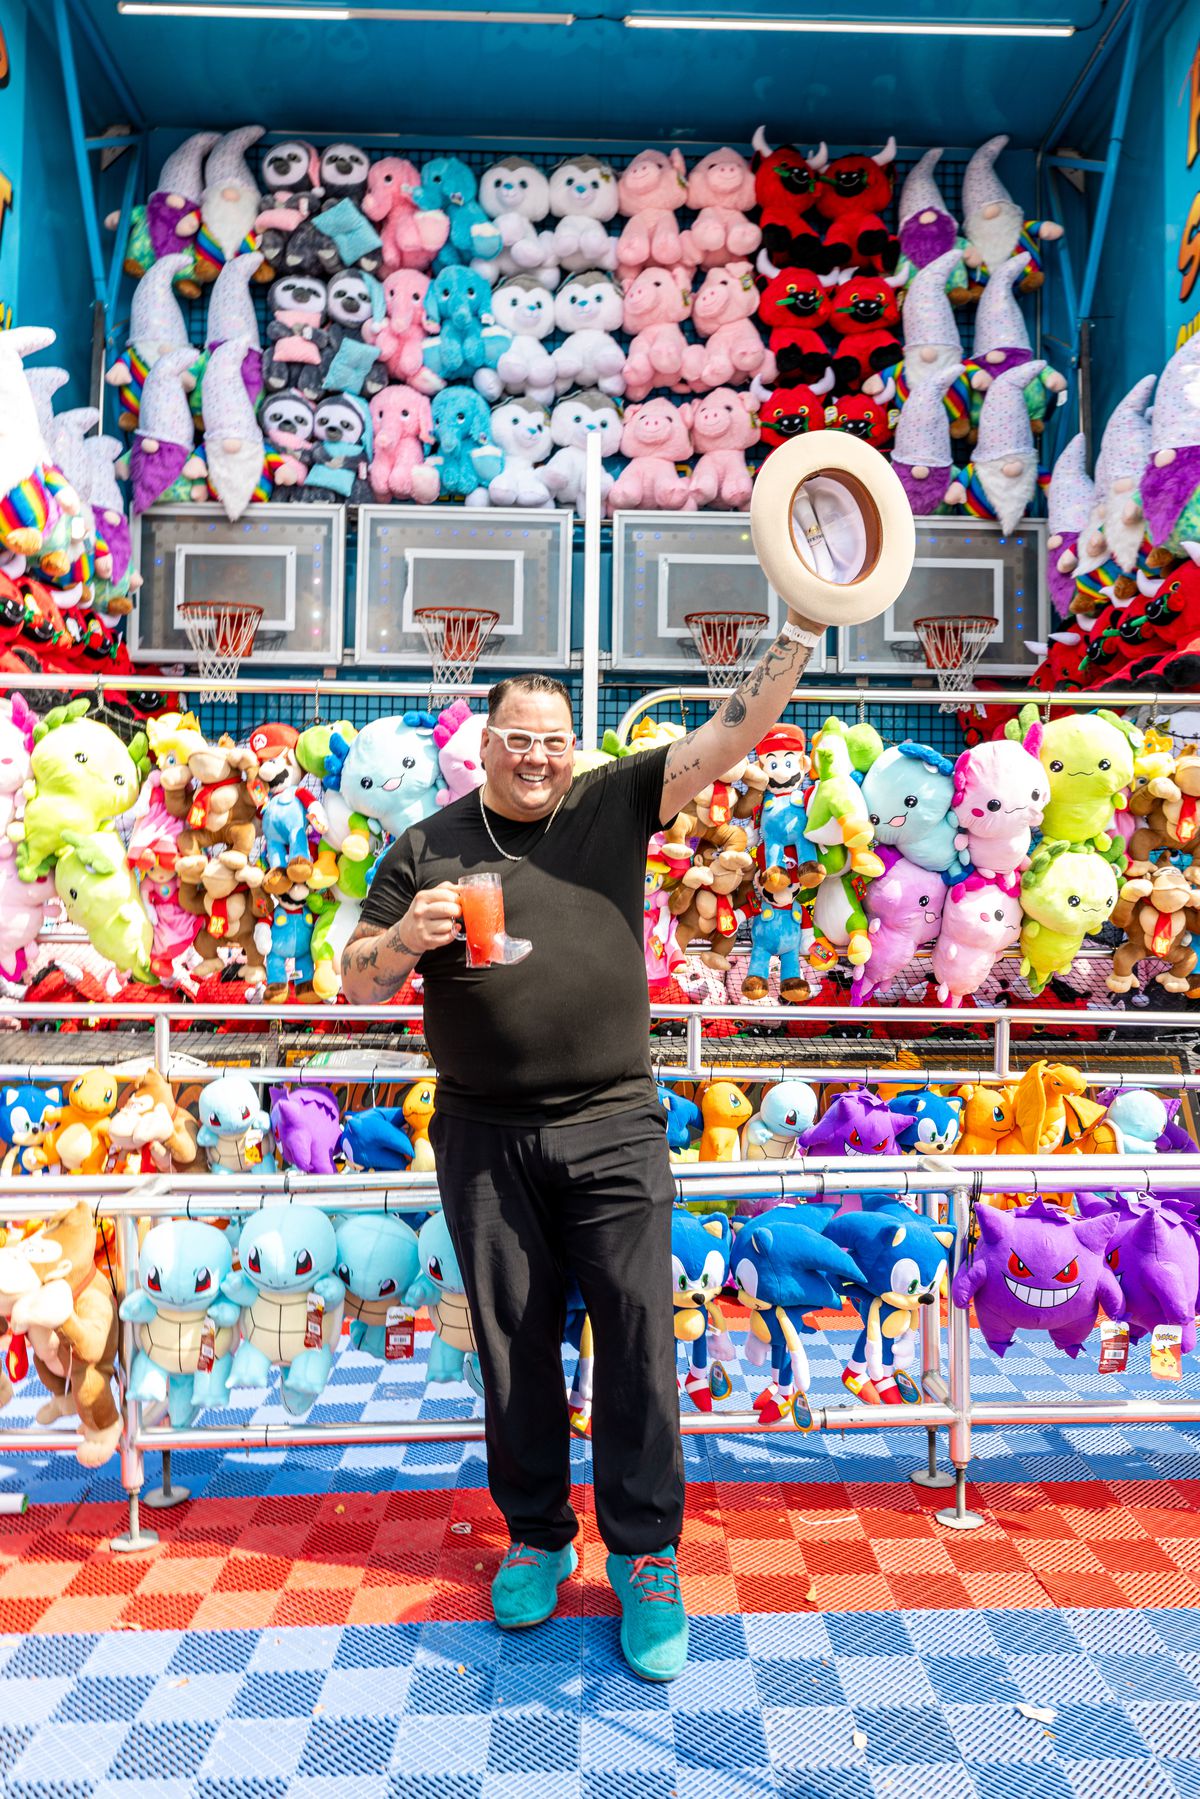 Celebrity chef Graham Elliot stands in front of a fair game with loads of colorful stuffed animals. He’s dressed all in black and waves a cowboy hat with his right hand. In his left, he holds a red drink in a clear plastic boot.